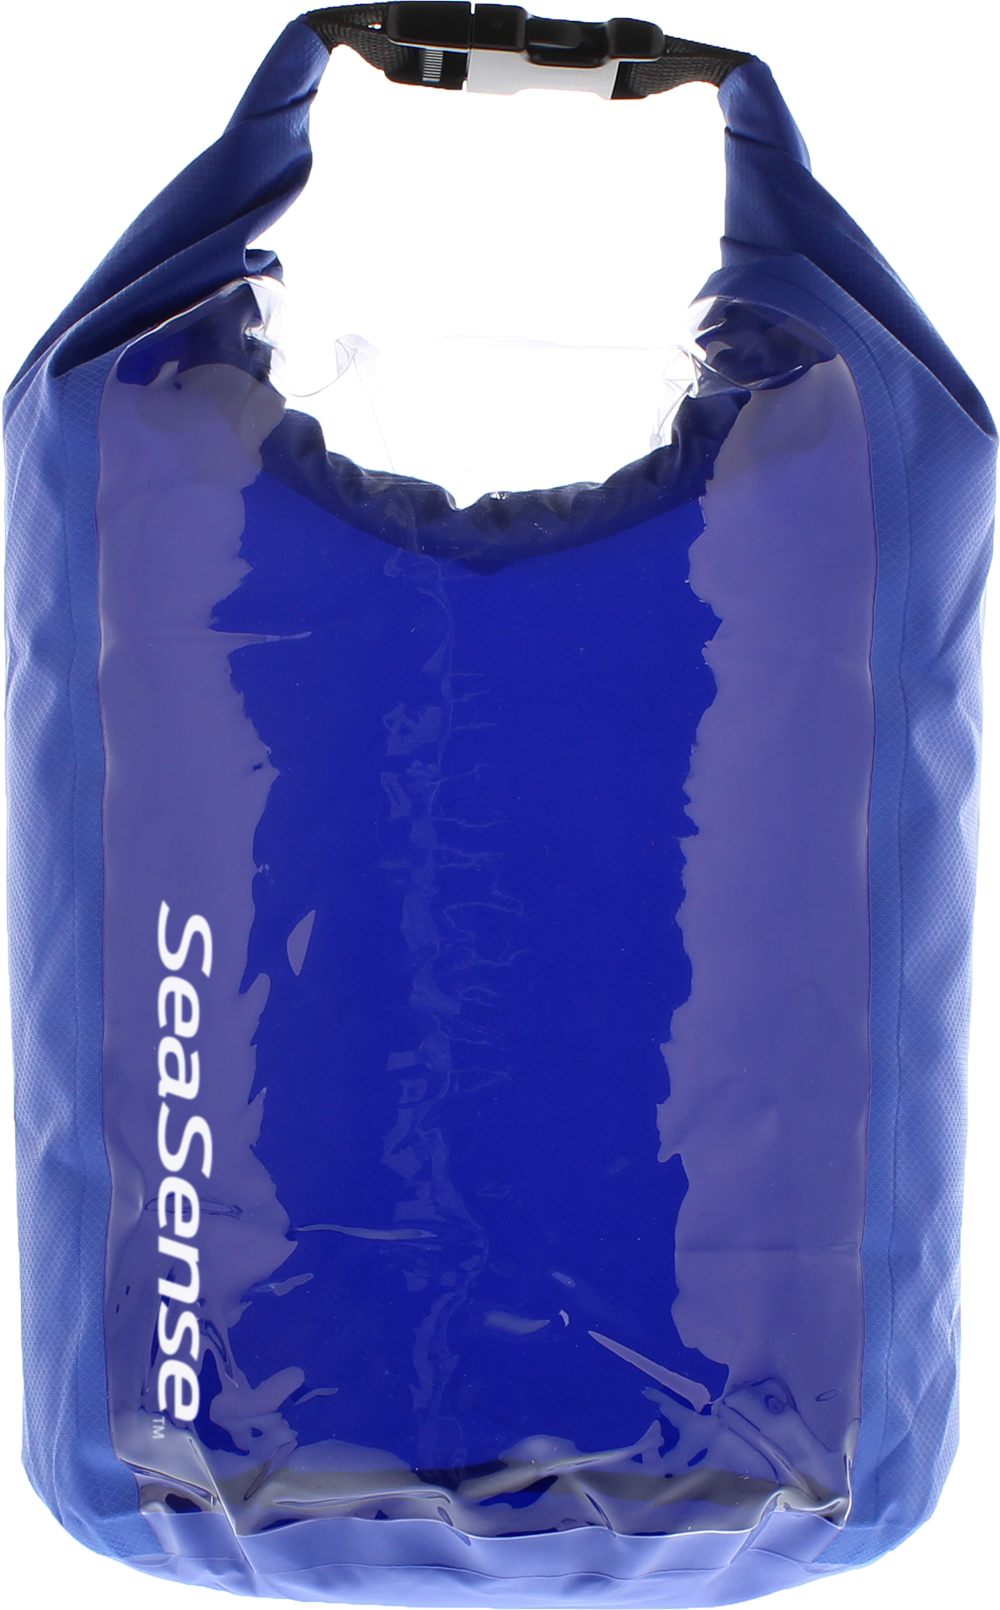 Roll Up Dry Bag - SeaSense | Marine Products